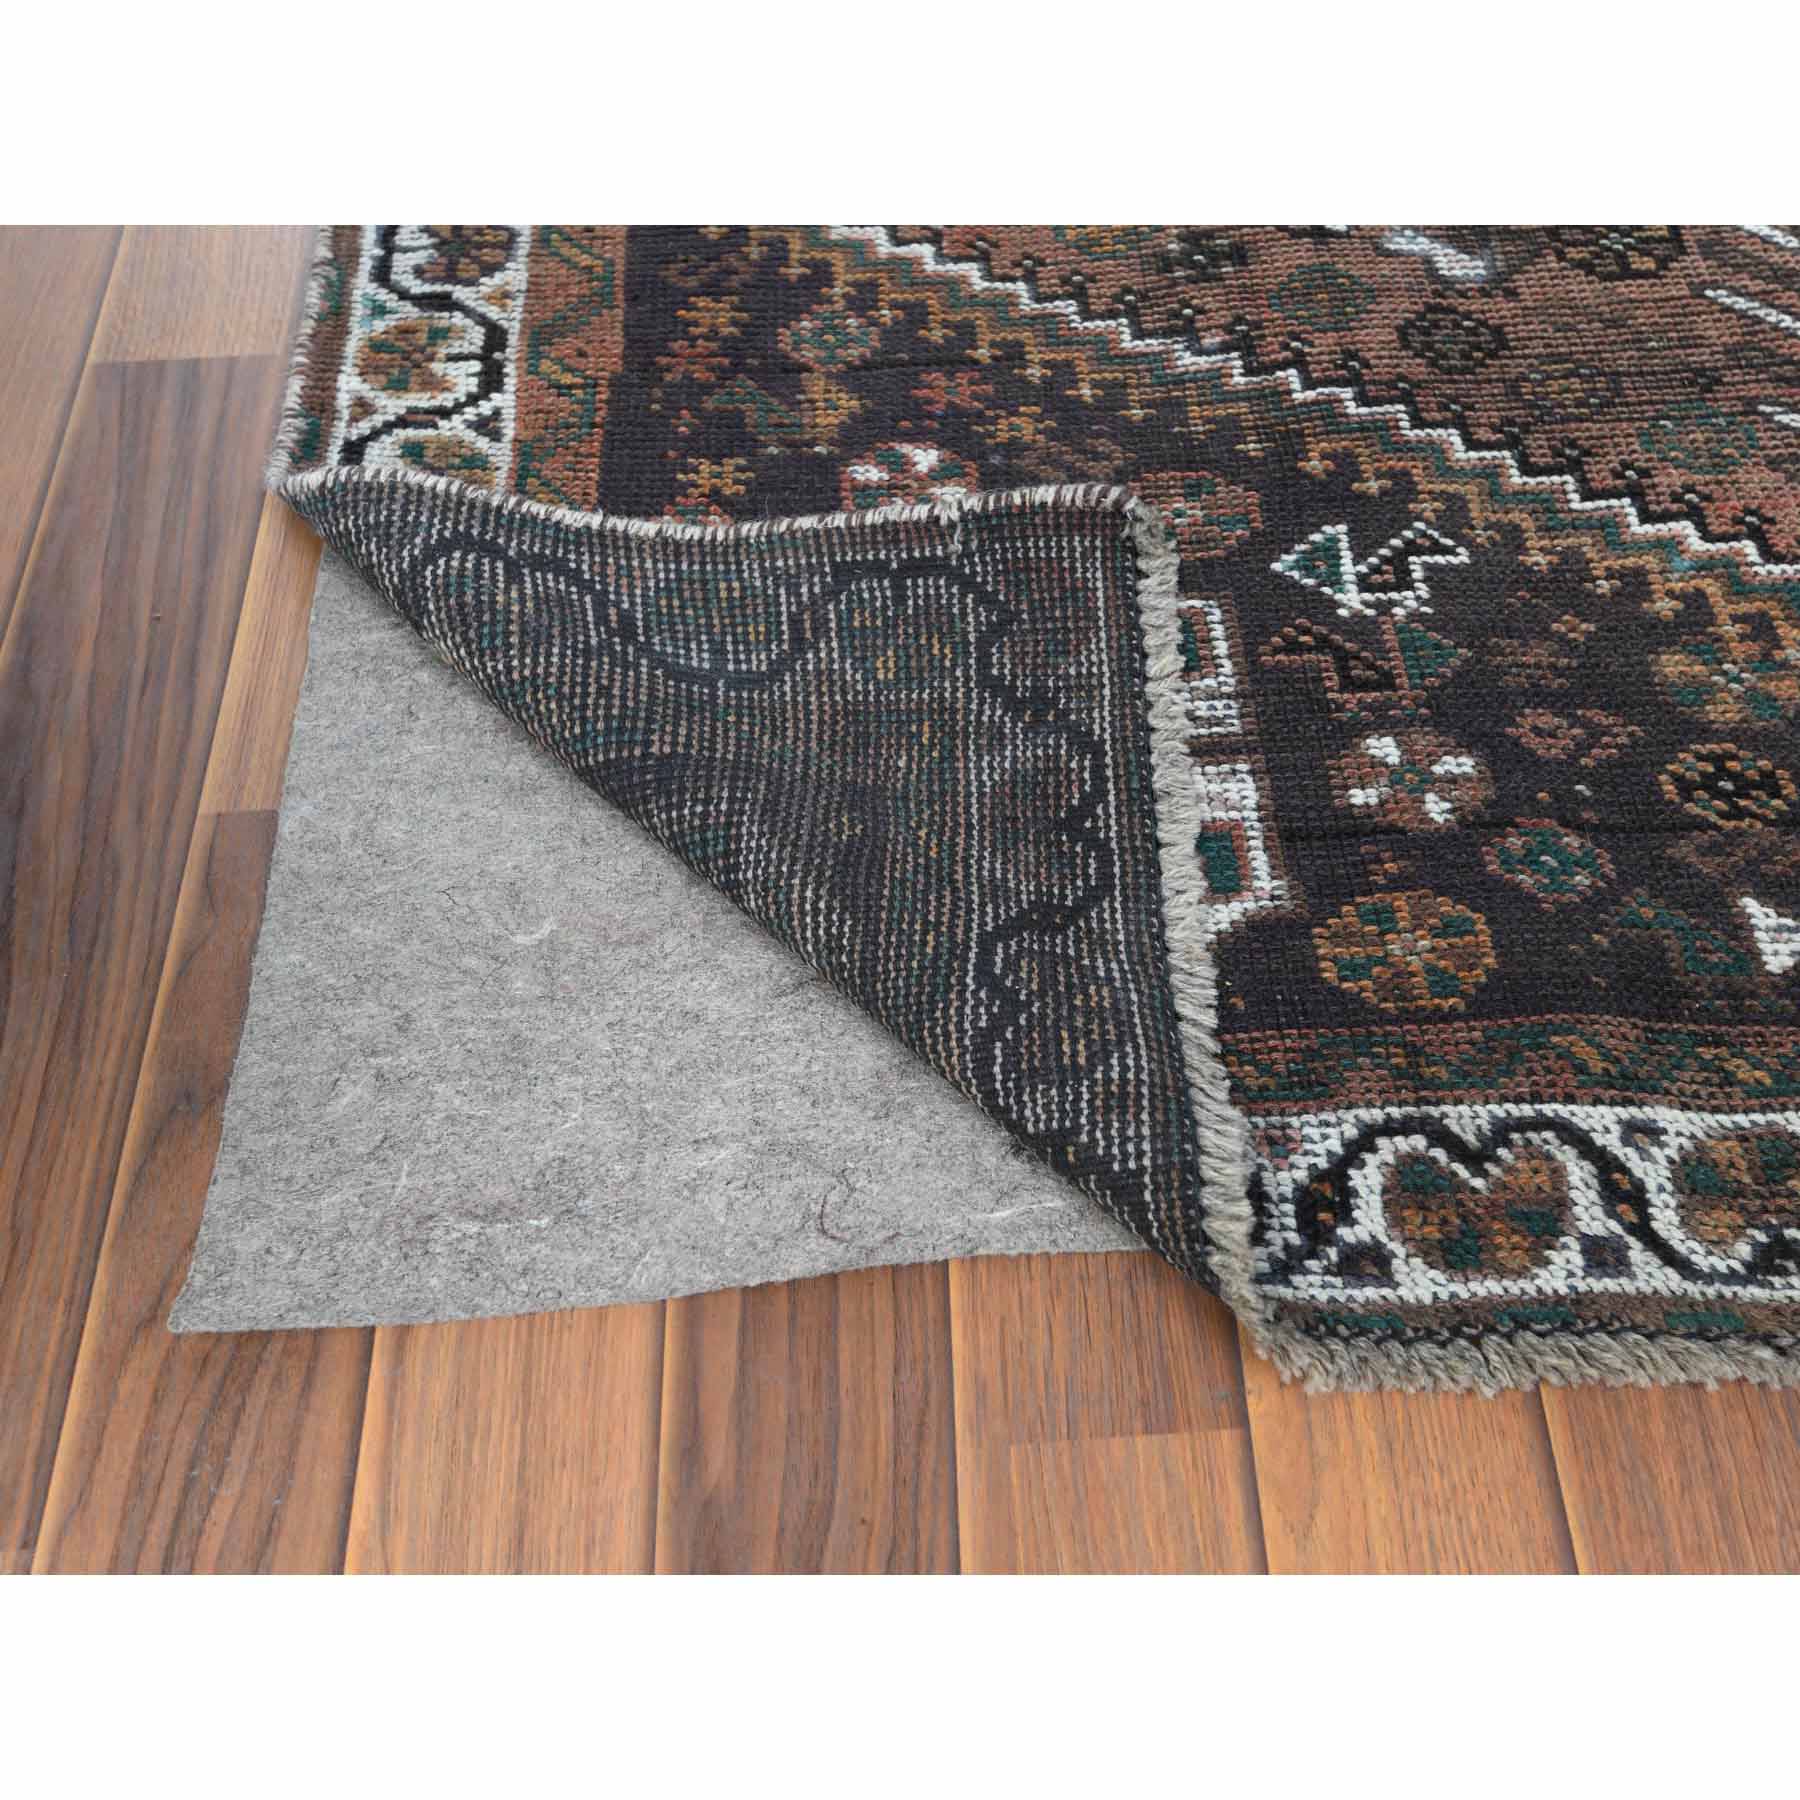 Overdyed-Vintage-Hand-Knotted-Rug-302960